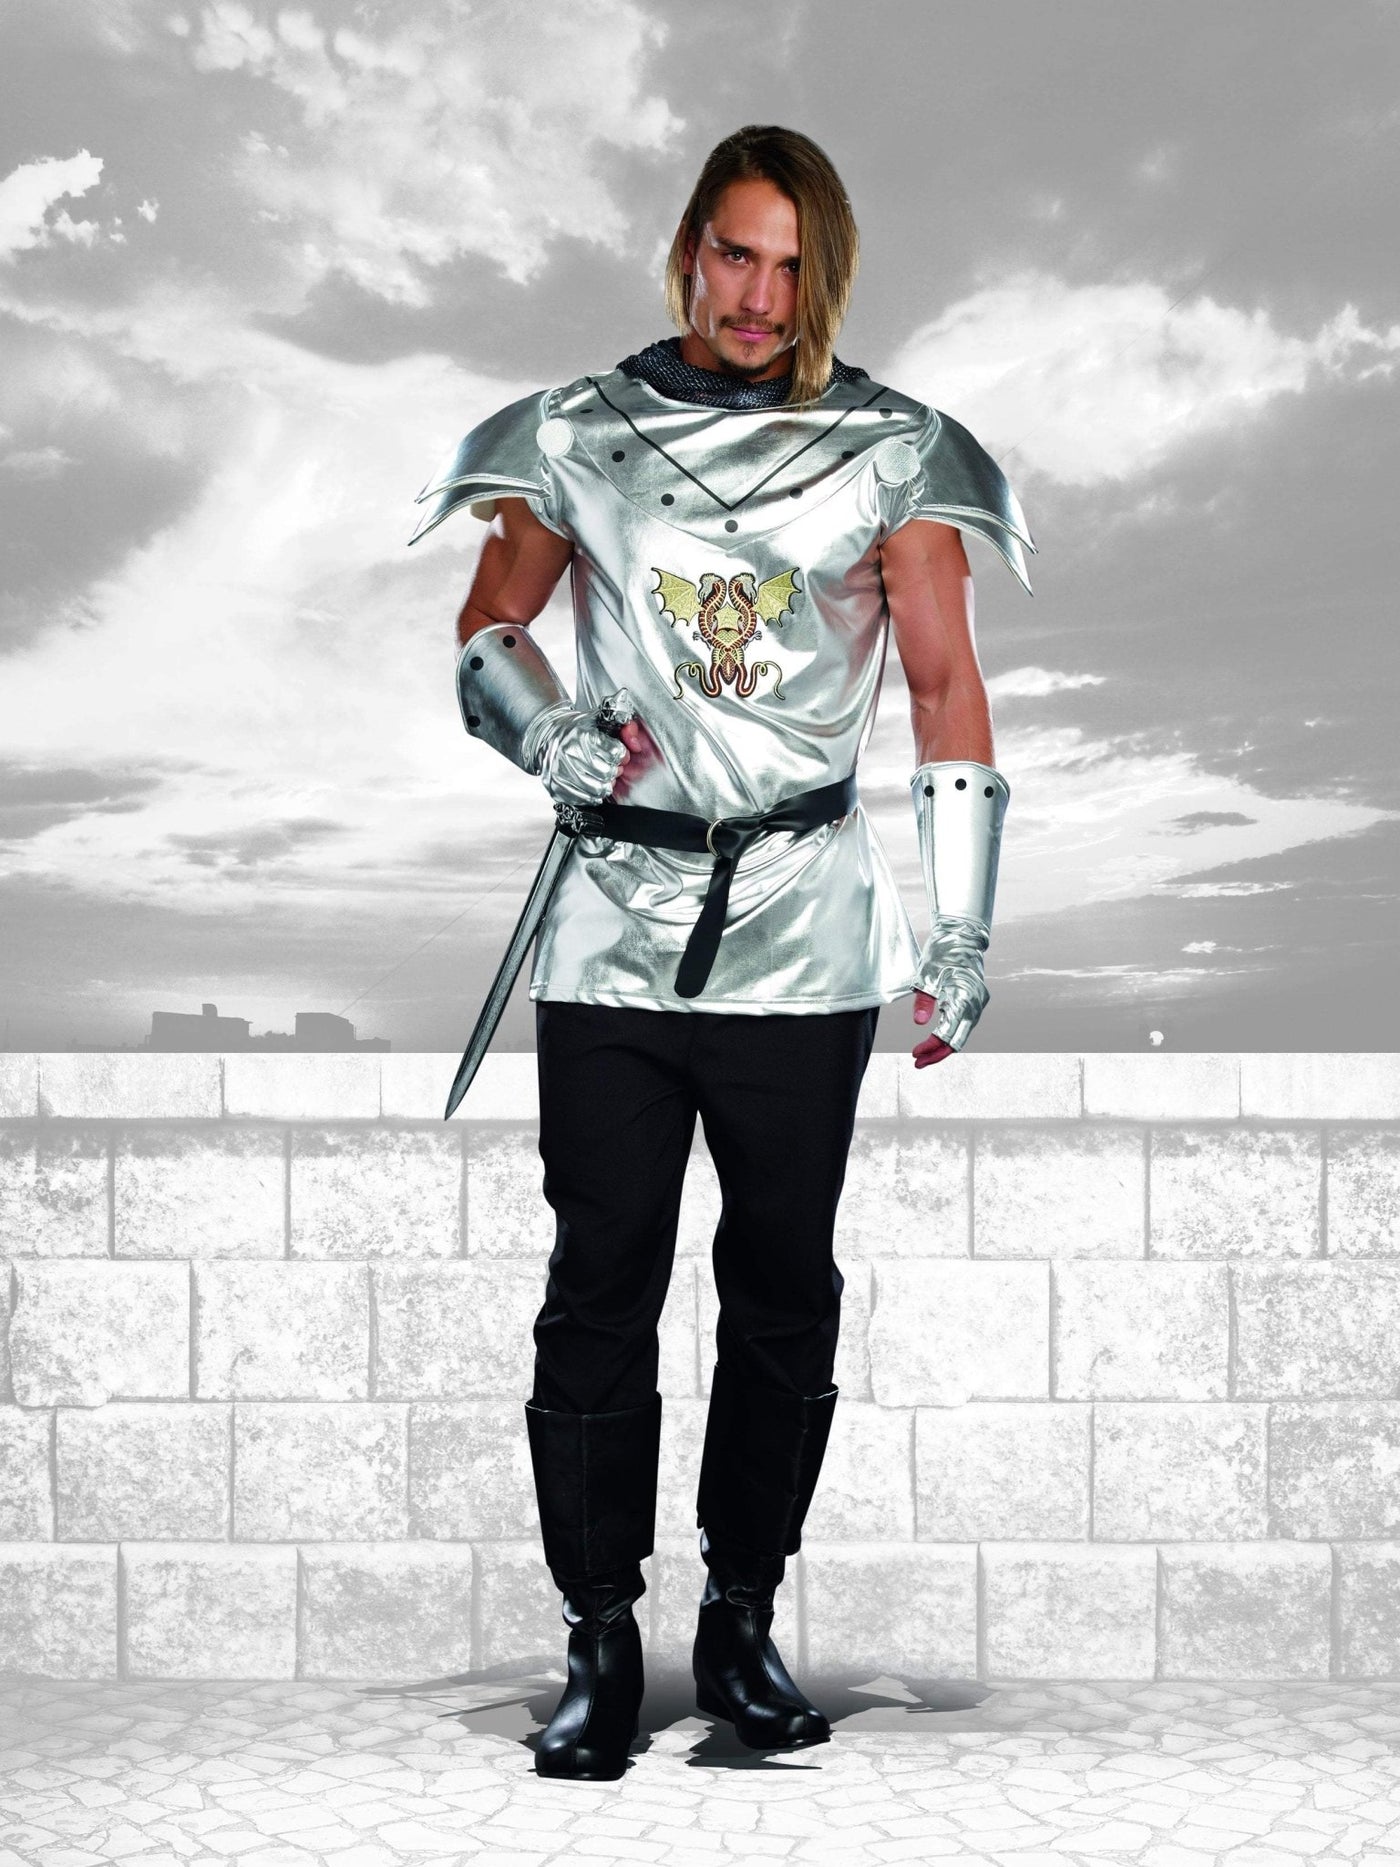 Mens Knight Time Costume - JJ's Party House